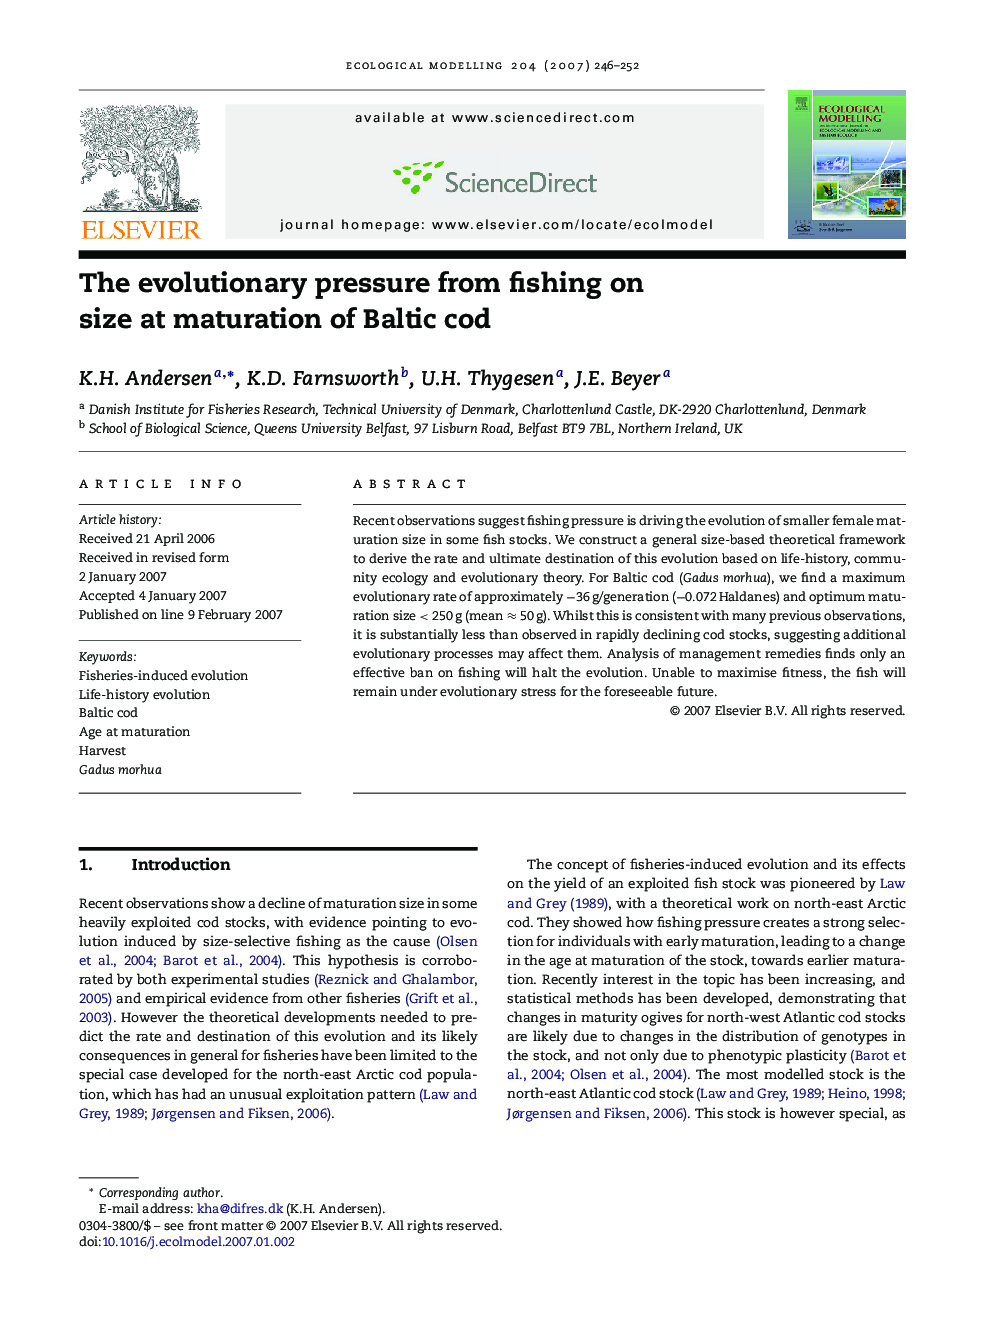 The evolutionary pressure from fishing on size at maturation of Baltic cod